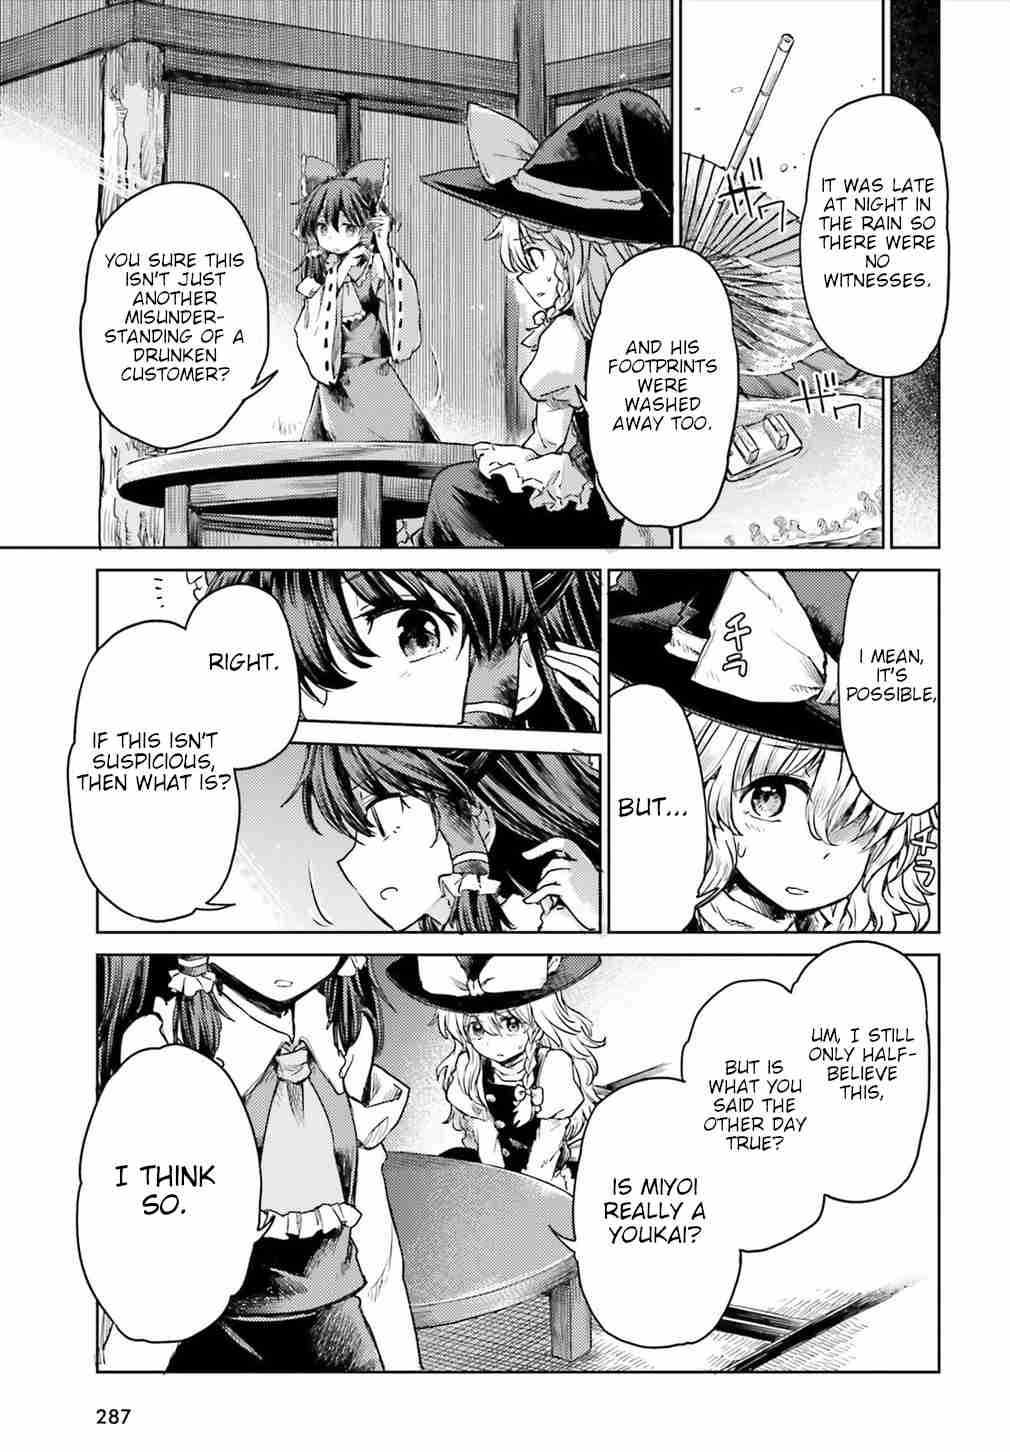 Touhou Suichouka ~ Lotus Eater tachi no Suisei Vol. 1 Ch. 6 No Youkai Stands in a Place Without Sake (Part 1)